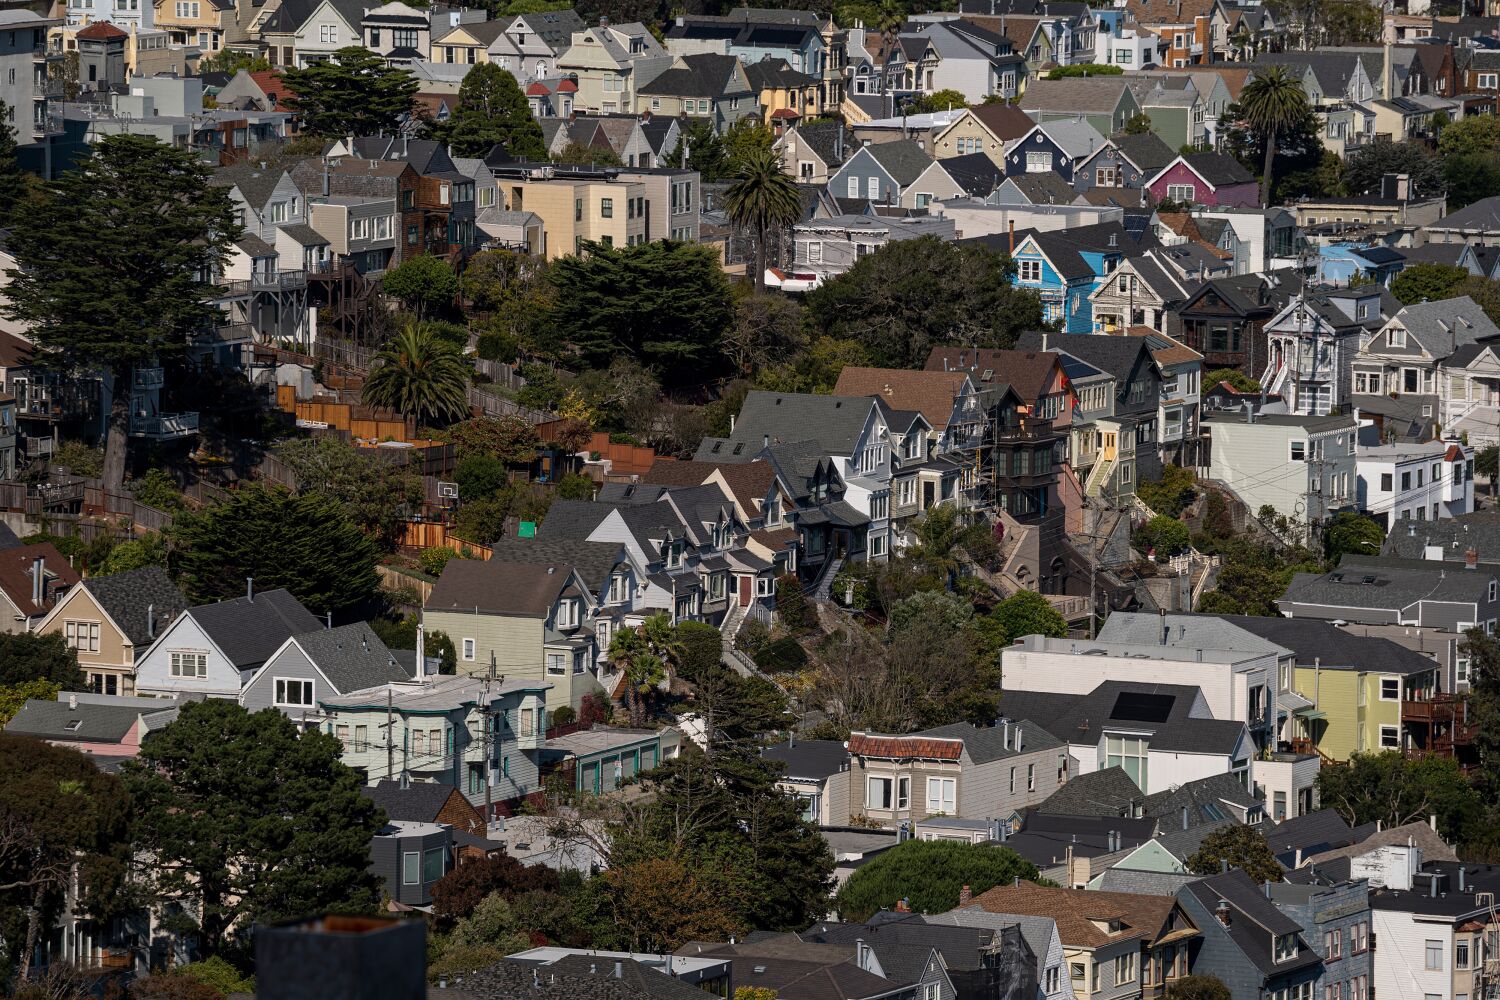 More San Francisco homes selling below asking price. Could that trend come to L.A.?